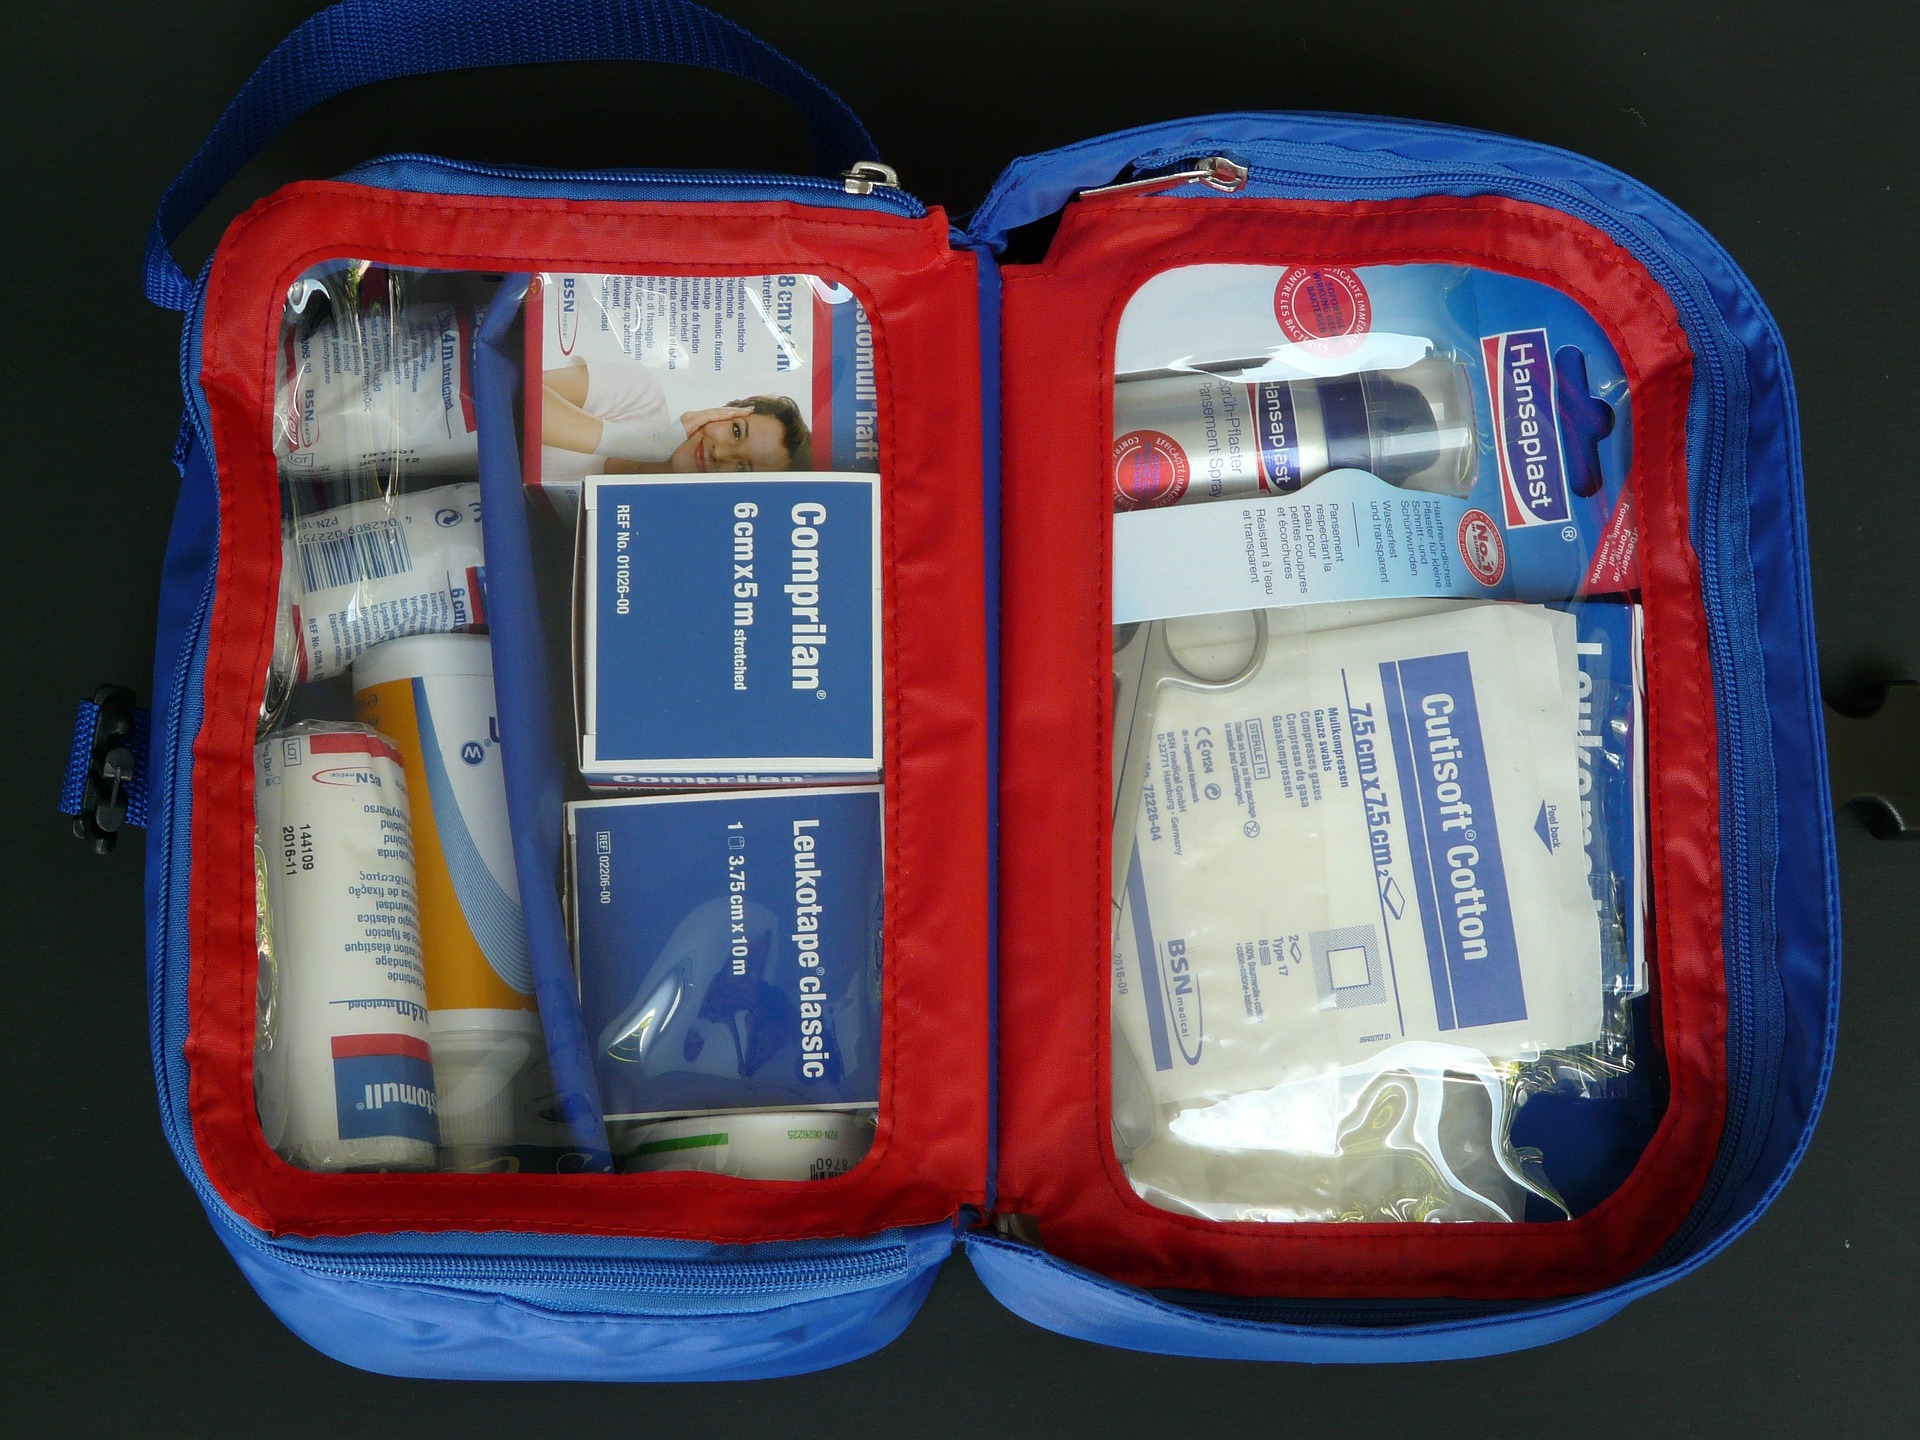 first-aid-kit-59645_1920